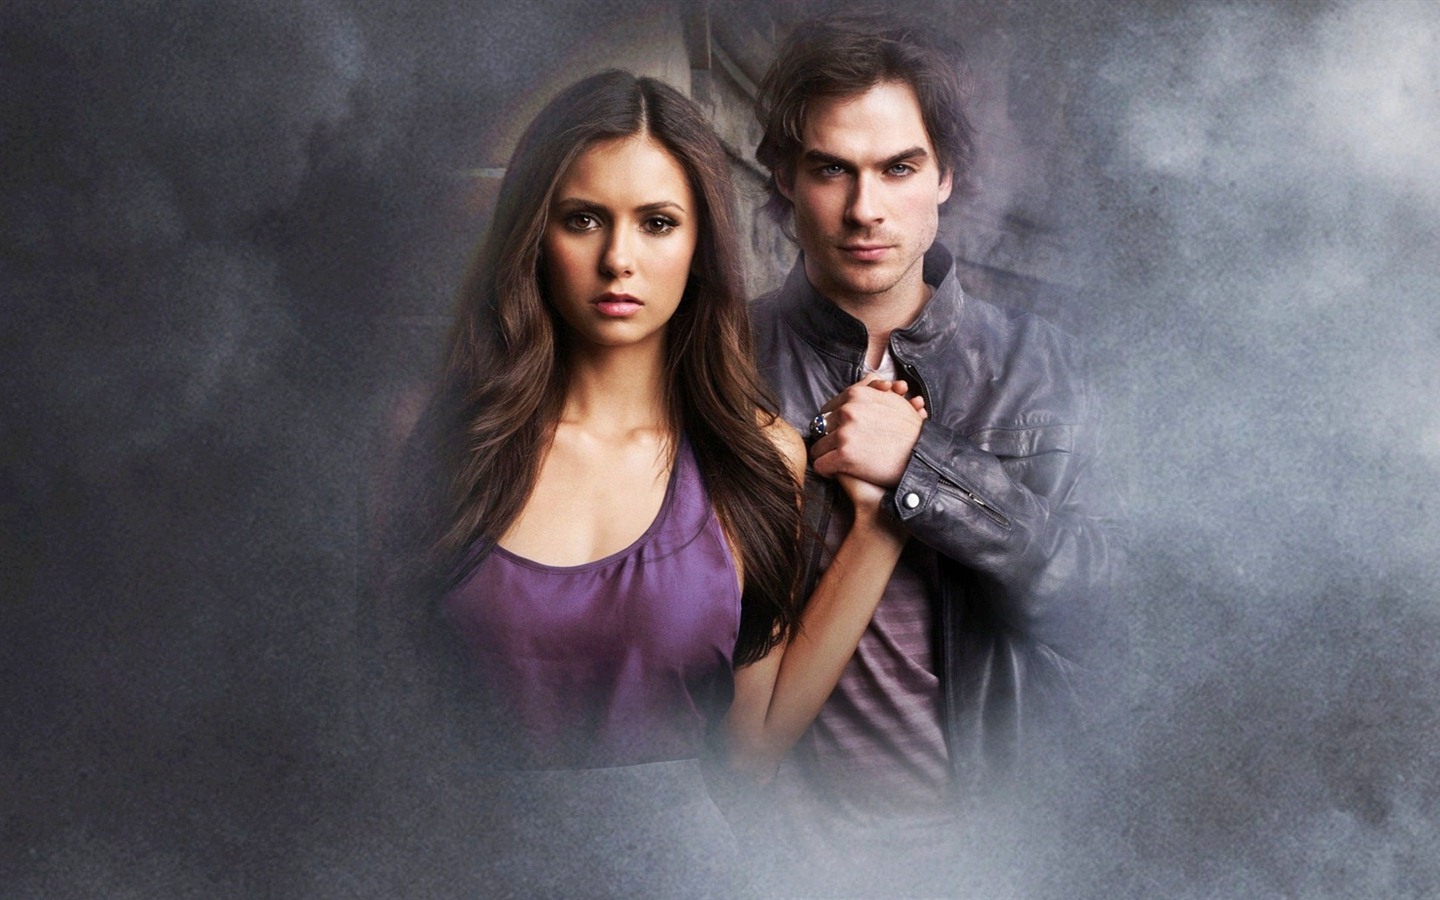 The Vampire Diaries wallpapers HD #11 - 1440x900